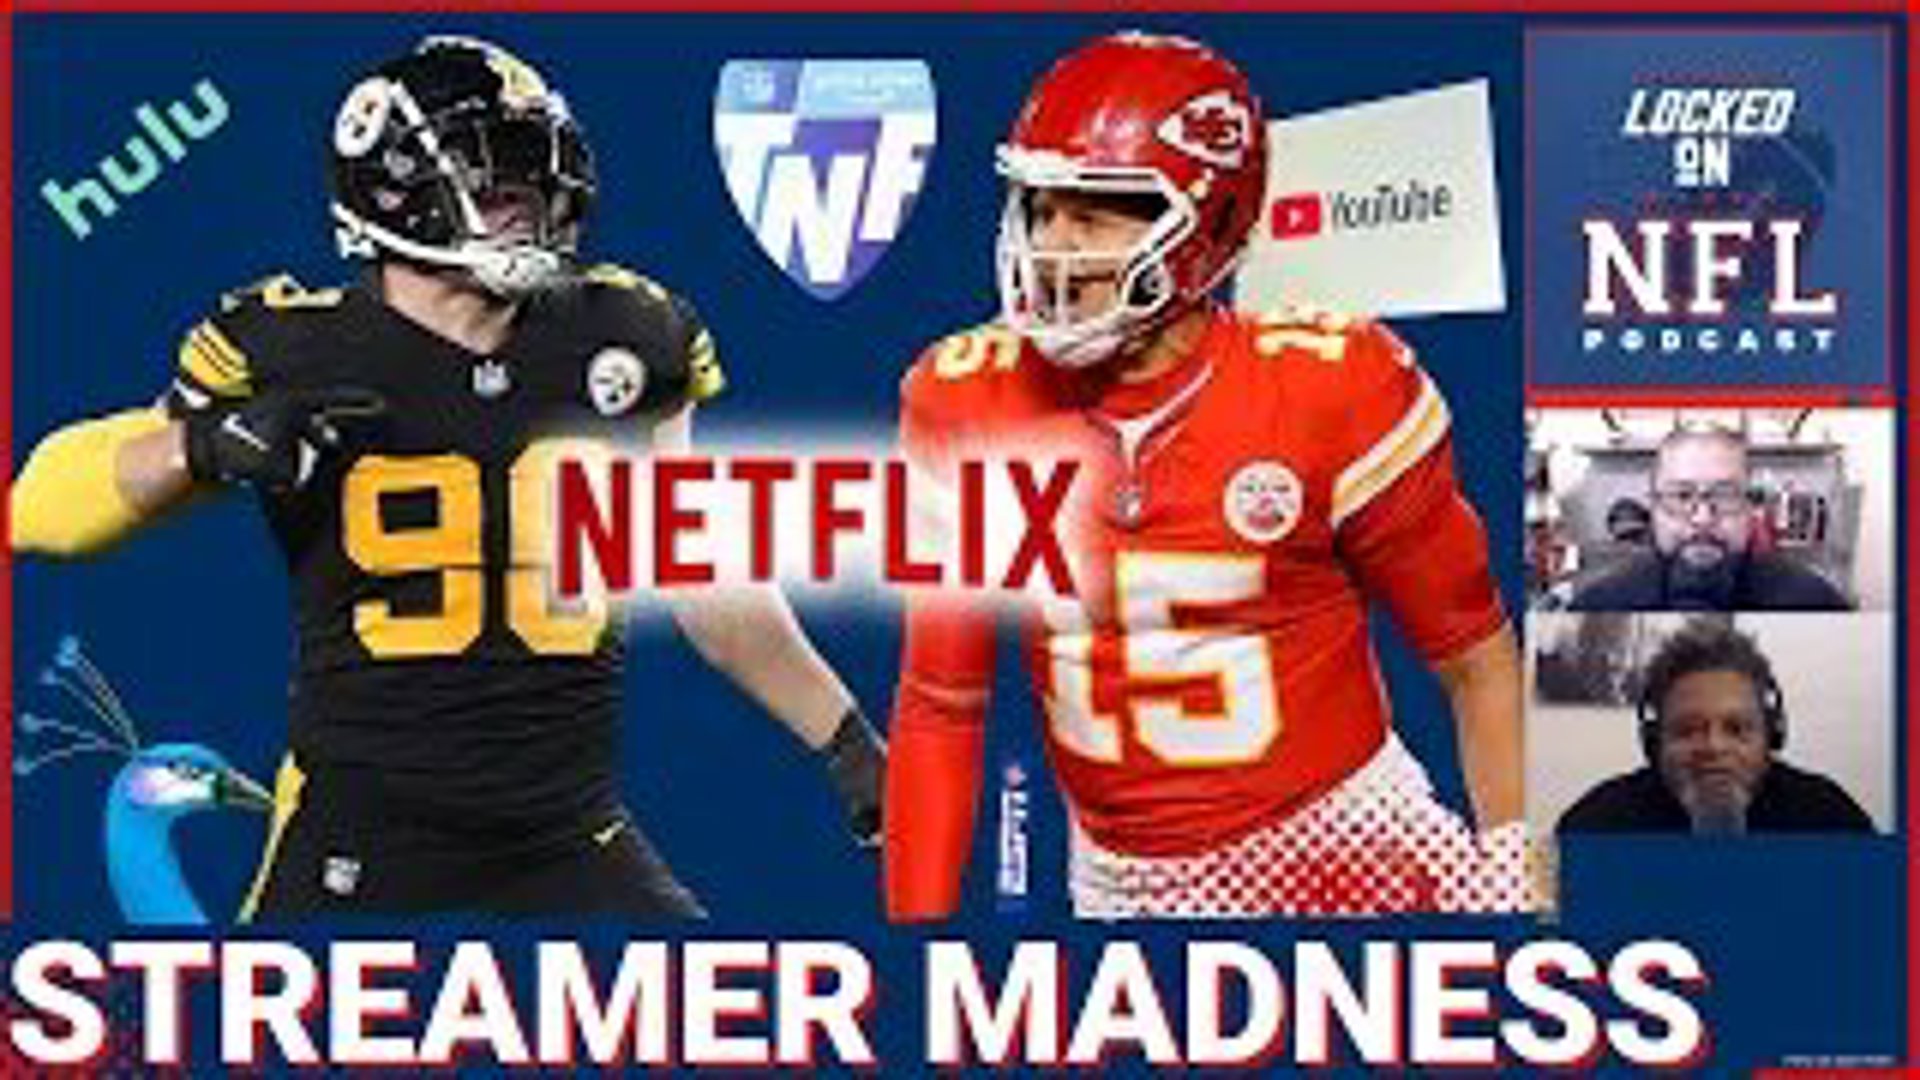 Discussing the NFL and its obsession with streaming services as Netflix gets an exclusive Christmas Day double-header. And we're talking about the NFL Schedule!